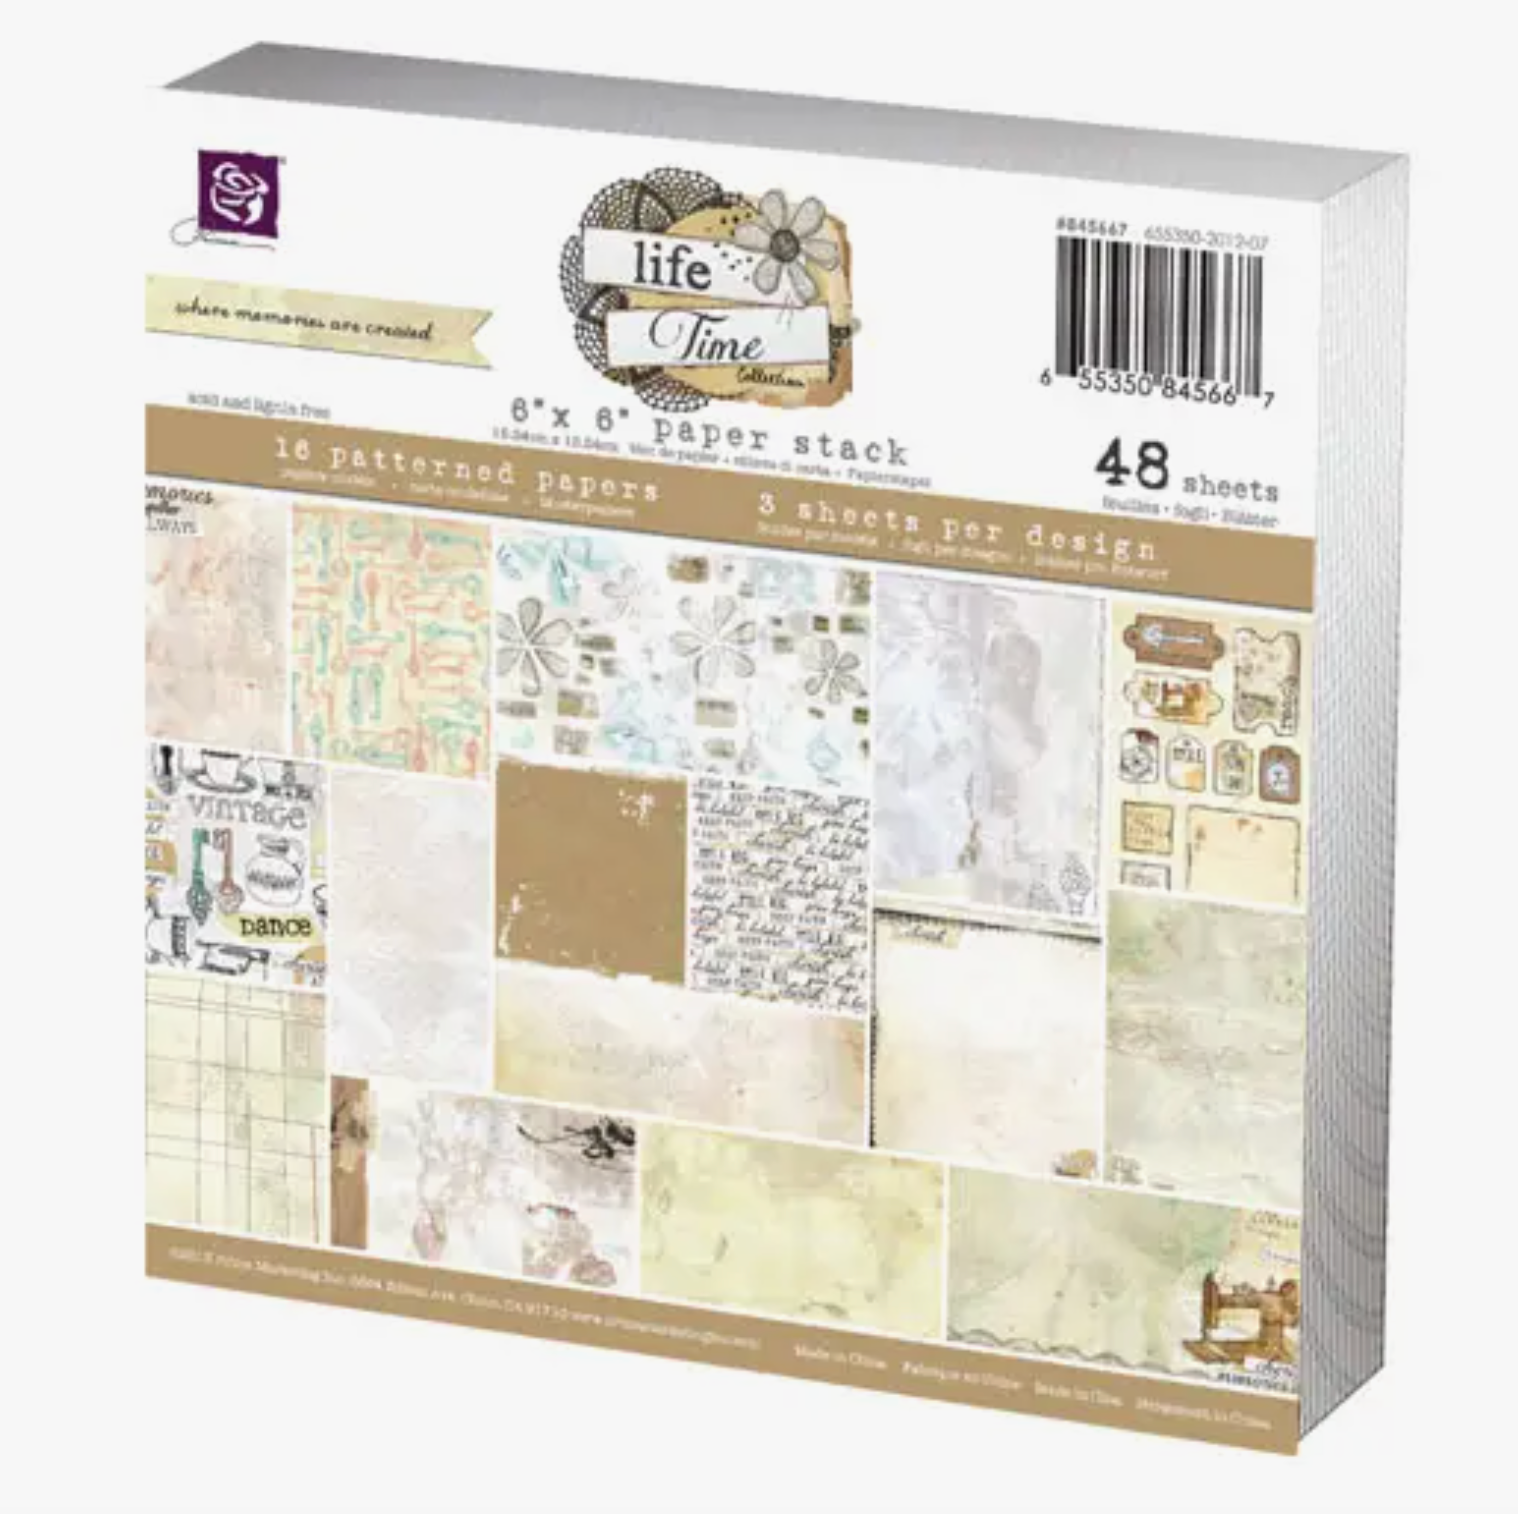 Impression Obsession Art Supplies 6x6 inch Paper Pad PP027